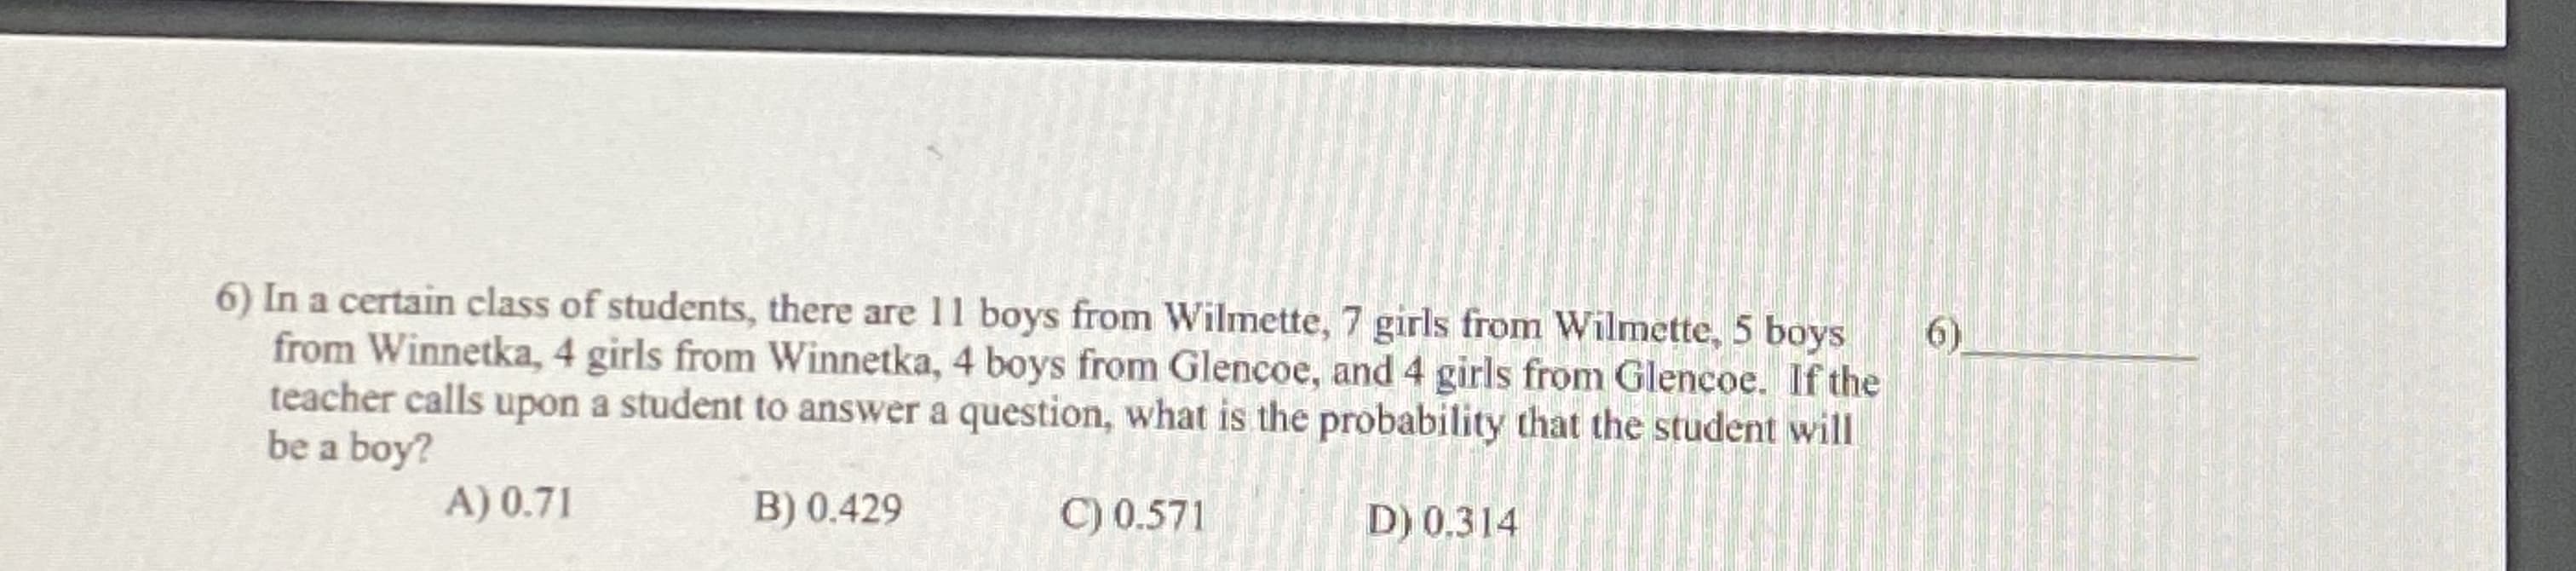 In a certain class of students, there are 11 boys from Wilmette, 7 girls from Wilmette, 5 boys
from Winnetka, 4 girls from Winnetka, 4 boys from Glencoe, and 4 girls from Glencoe. If the
teacher calls upon a student to answer a question, what is the probability that the student will
be a boy?
A) 0.71
B) 0.429
C) 0.571
D) 0,314
